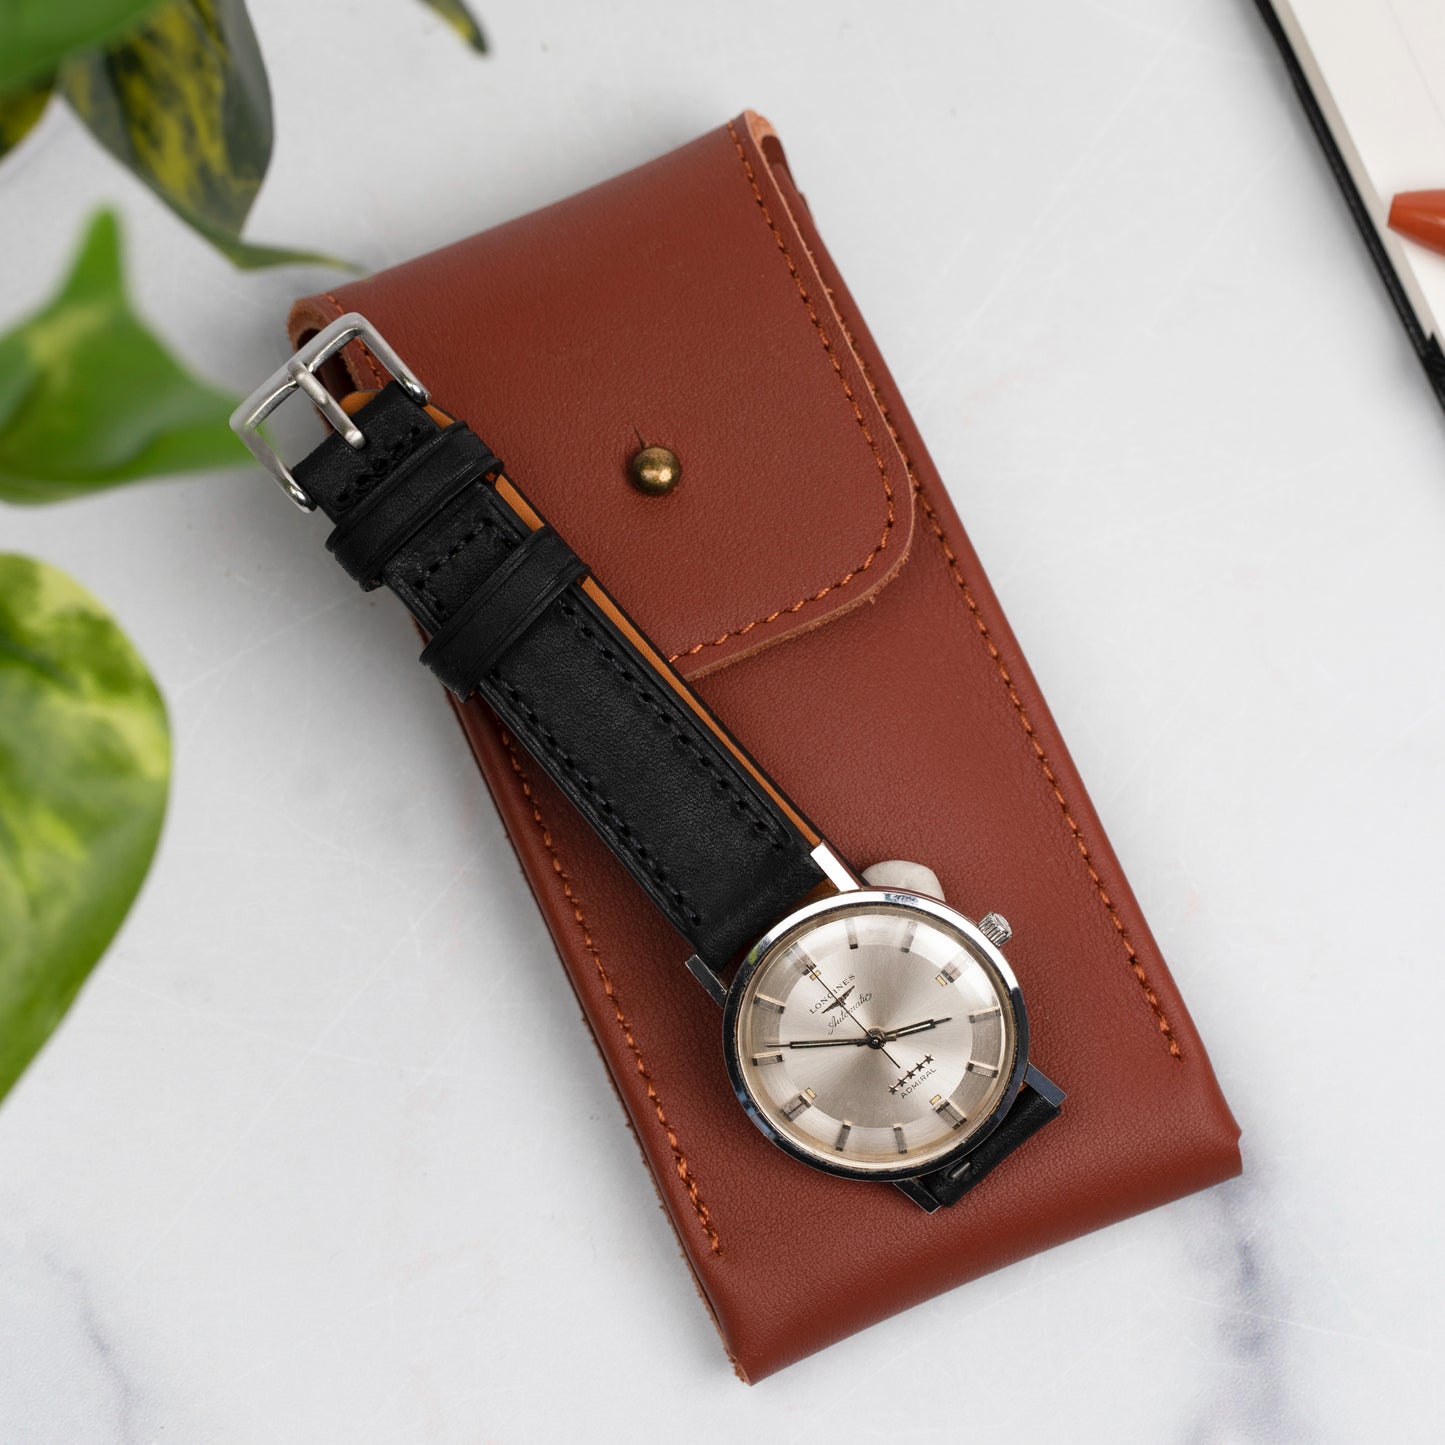 The Lorient Nappa Leather Watch Pouch In Brown